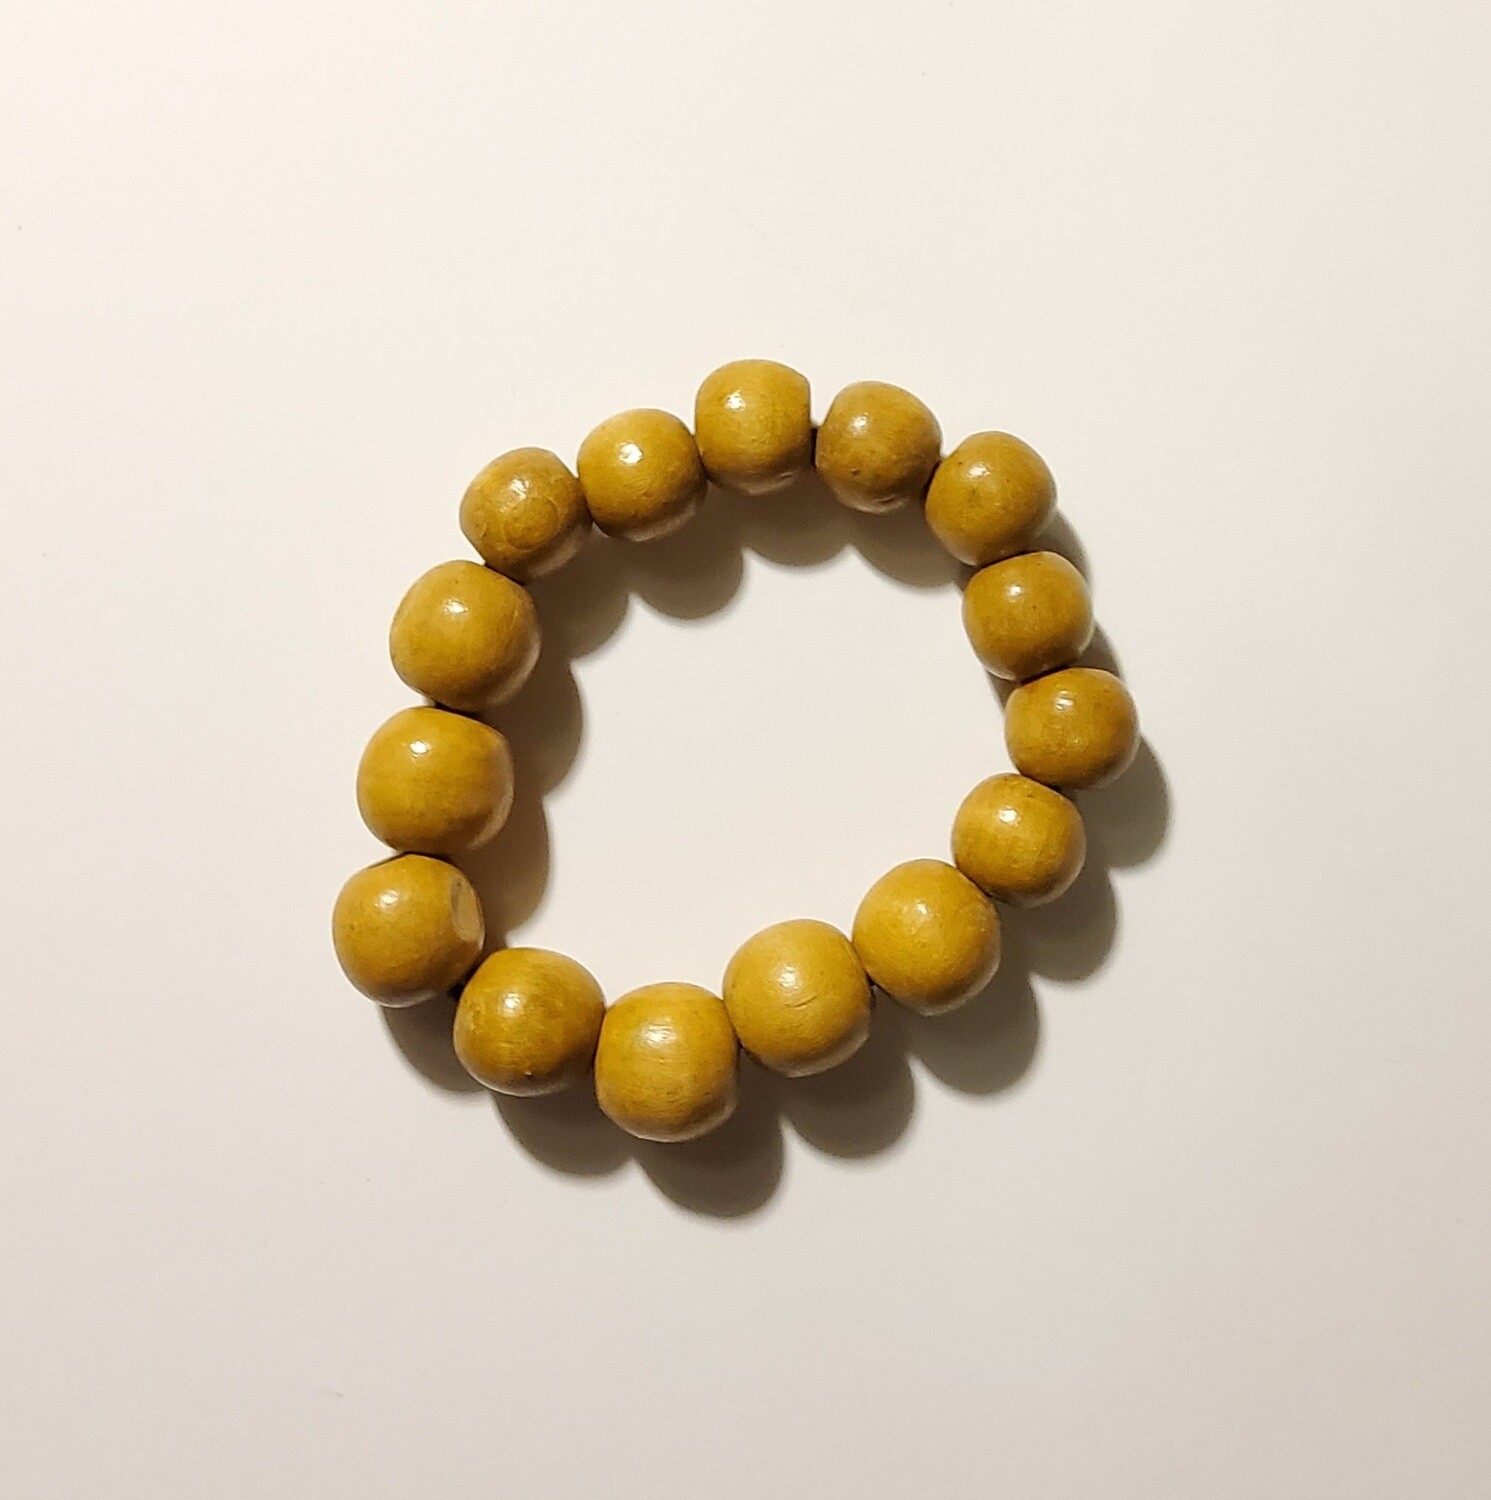 Pan African Bracelet- Concentration and Mindfulness